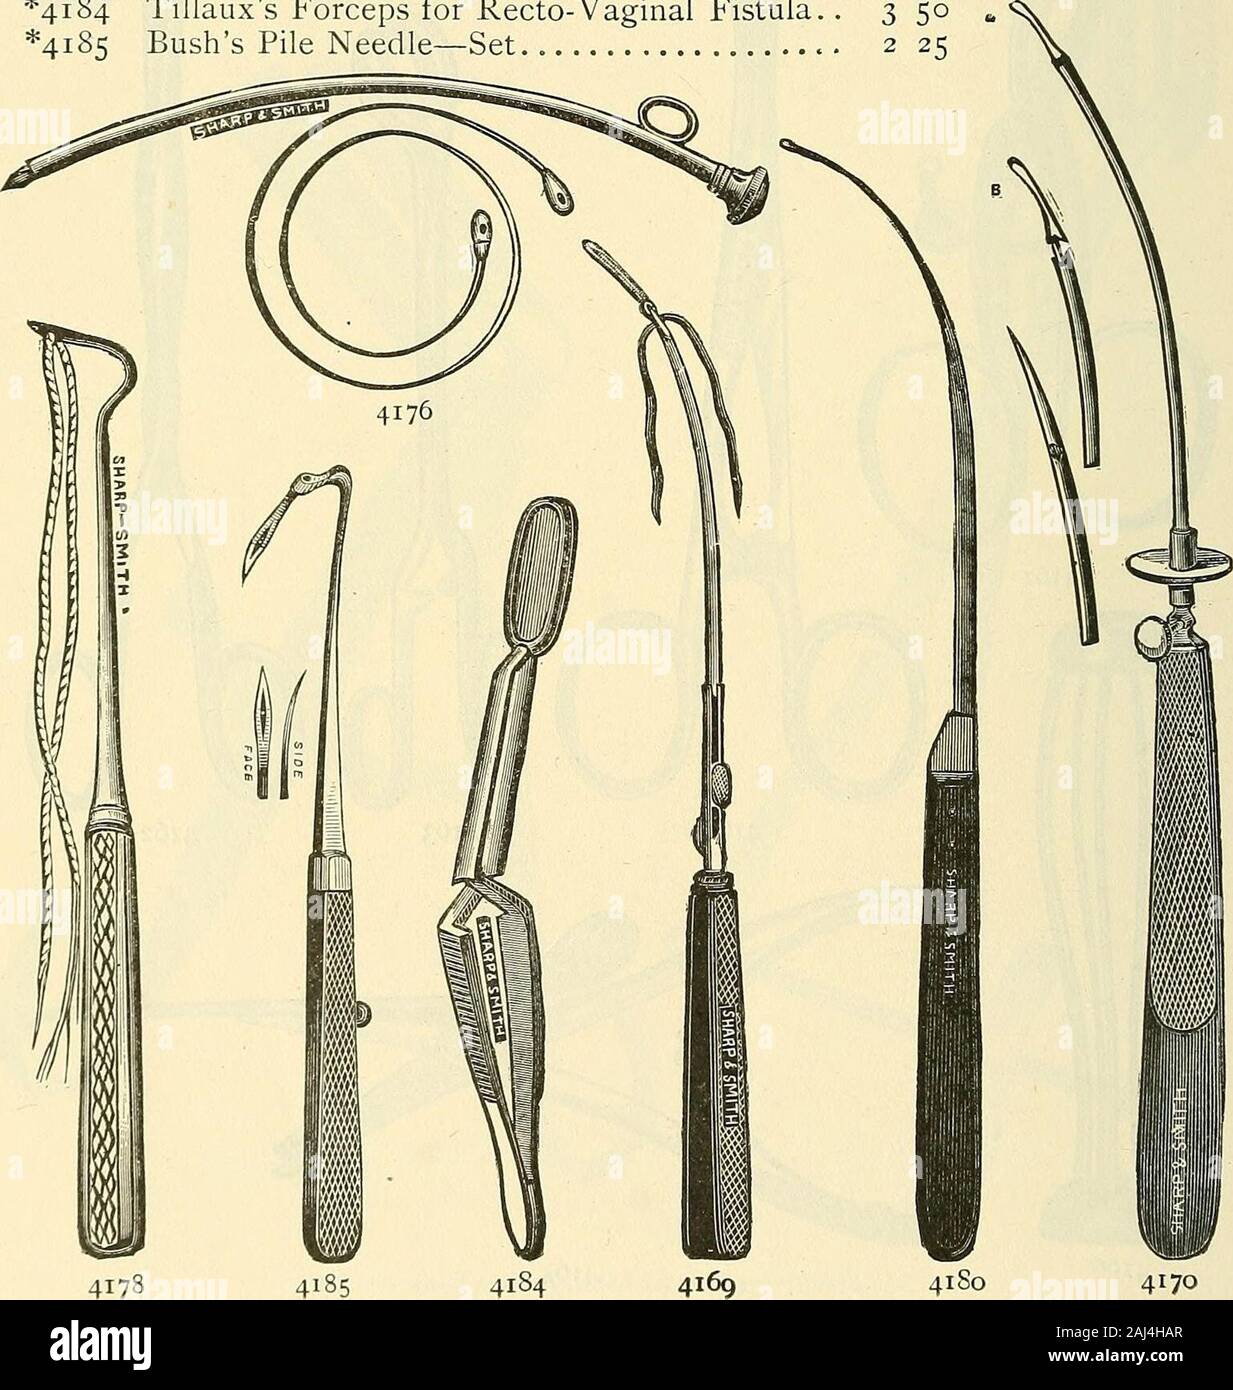 Catalogue of Sharp & Smith : importers, manufacturers, wholesale and retail dealers in surgical instruments, deformity apparatus, artificial limbs, artificial eyes, elastic stockings, trusses, crutches, supporters, galvanic and faradic batteries, etc., surgeons' appliances of every description . 4165 684 SHARP & SMITH, CHICAGO. *4i69 *4i7o 4171 4172 41734174 4175*4i76 4177*4i78 4179 *4i8o 4181 4182 4183*4i84*4i85 RECTAL INSTRUMENTS. Halls Elastic Ligature Carrier $ 3 50 Allinghams Elastic Ligature Carrier 2 60 Bushs Ligature Carrier 2 40 Lentes i 00 Plain „ I 00 Ostrums 4 00 Helmuths 2 75 Gibs Stock Photo